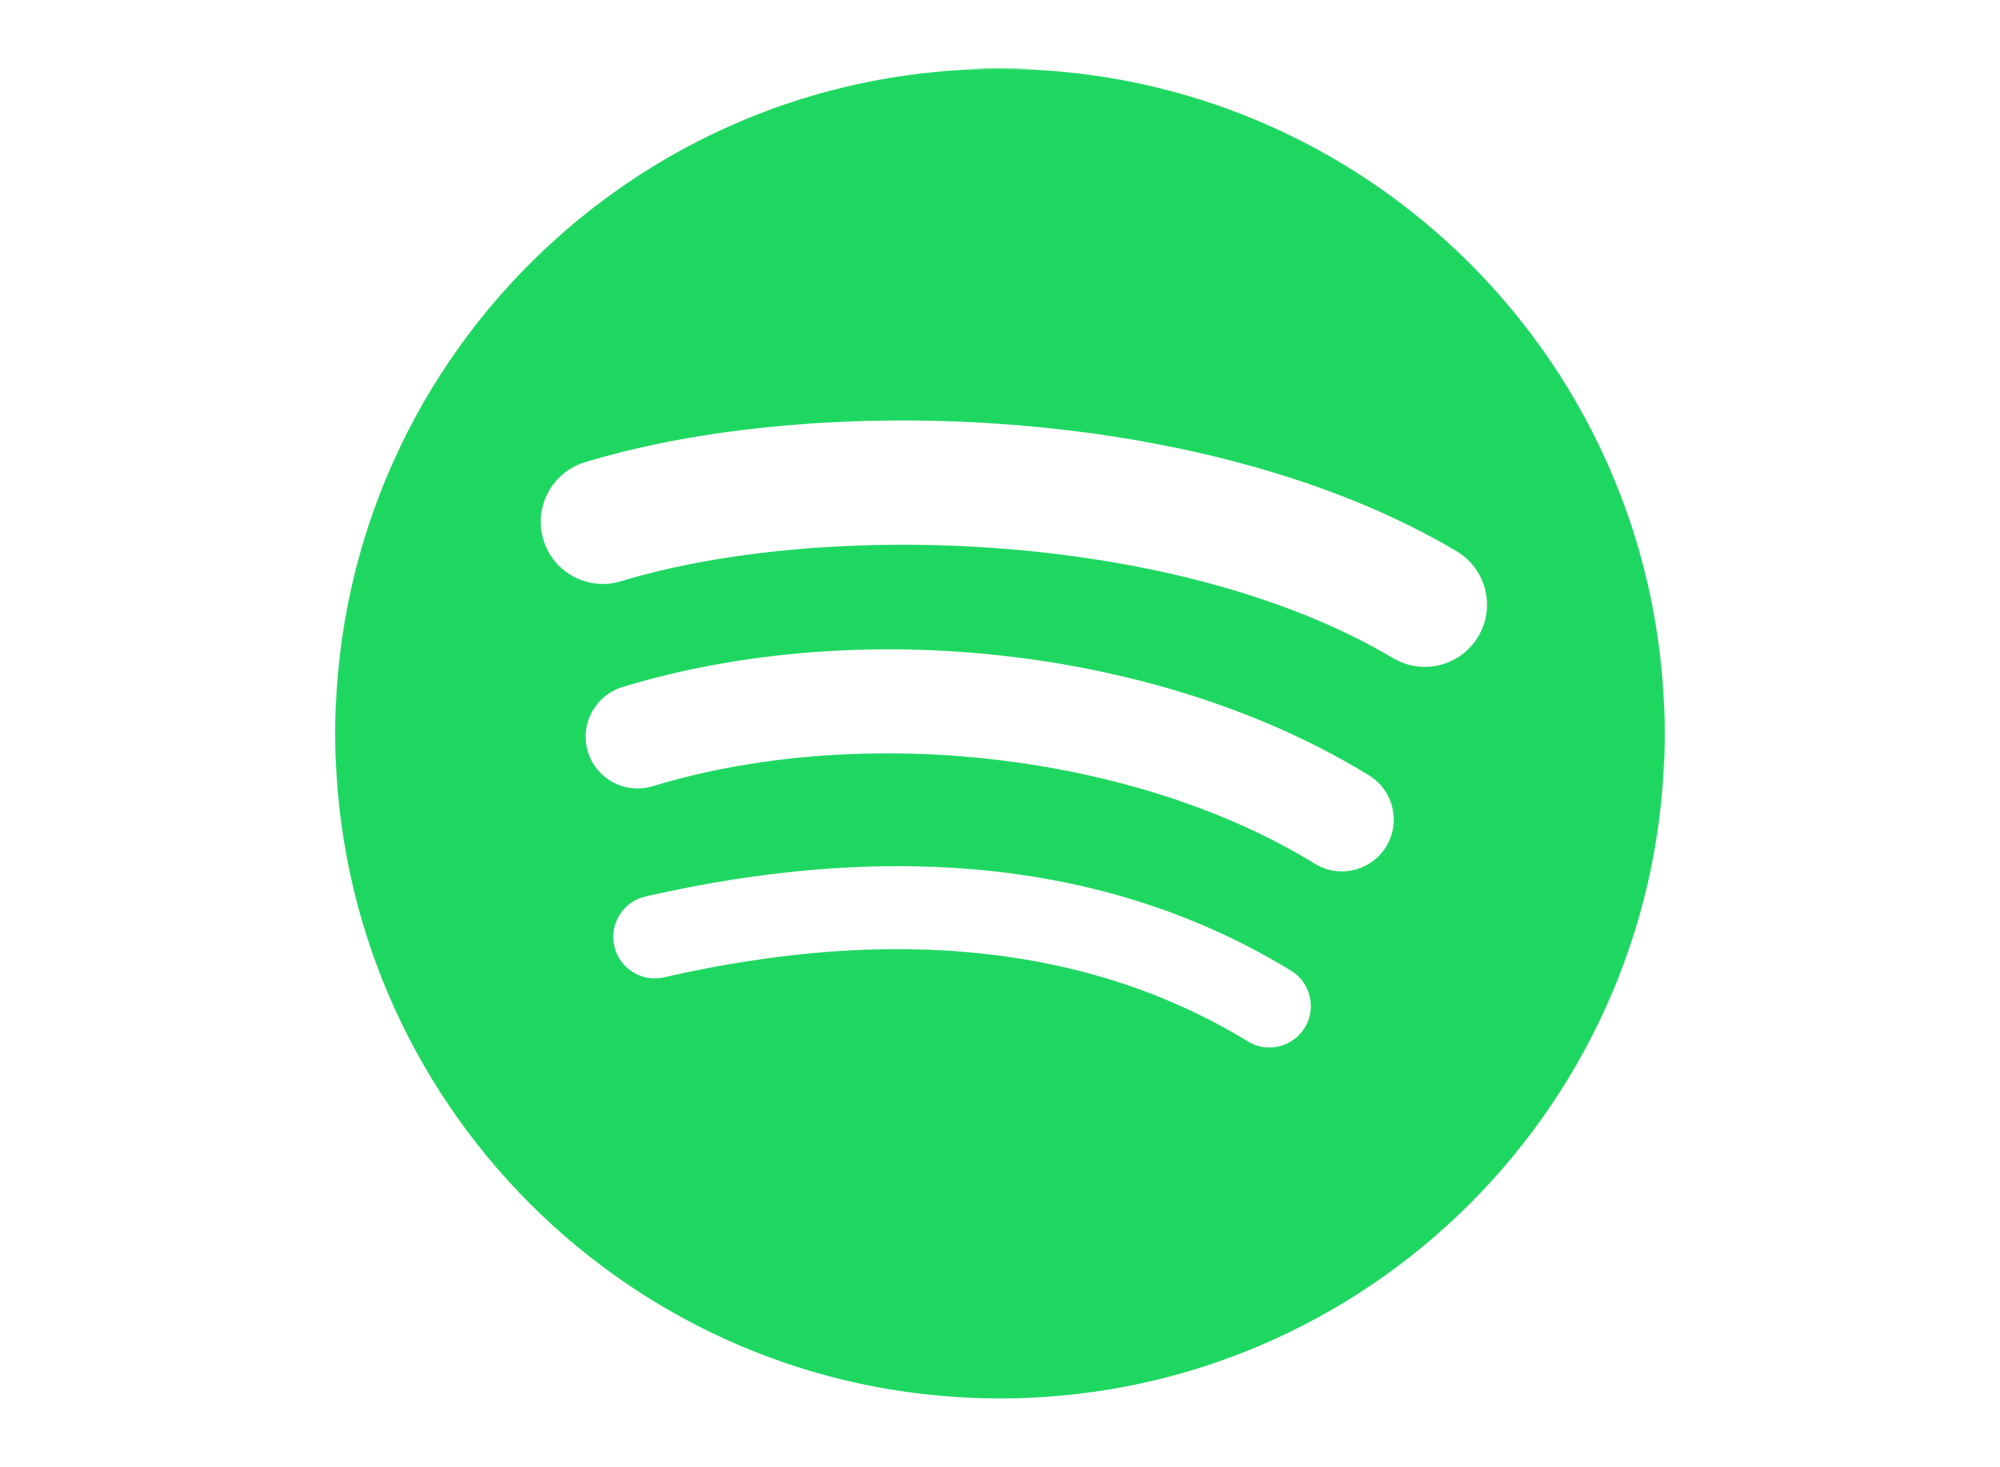 Most Popular Green Logo - Spotify Logo, Spotify Symbol, Meaning, History and Evolution